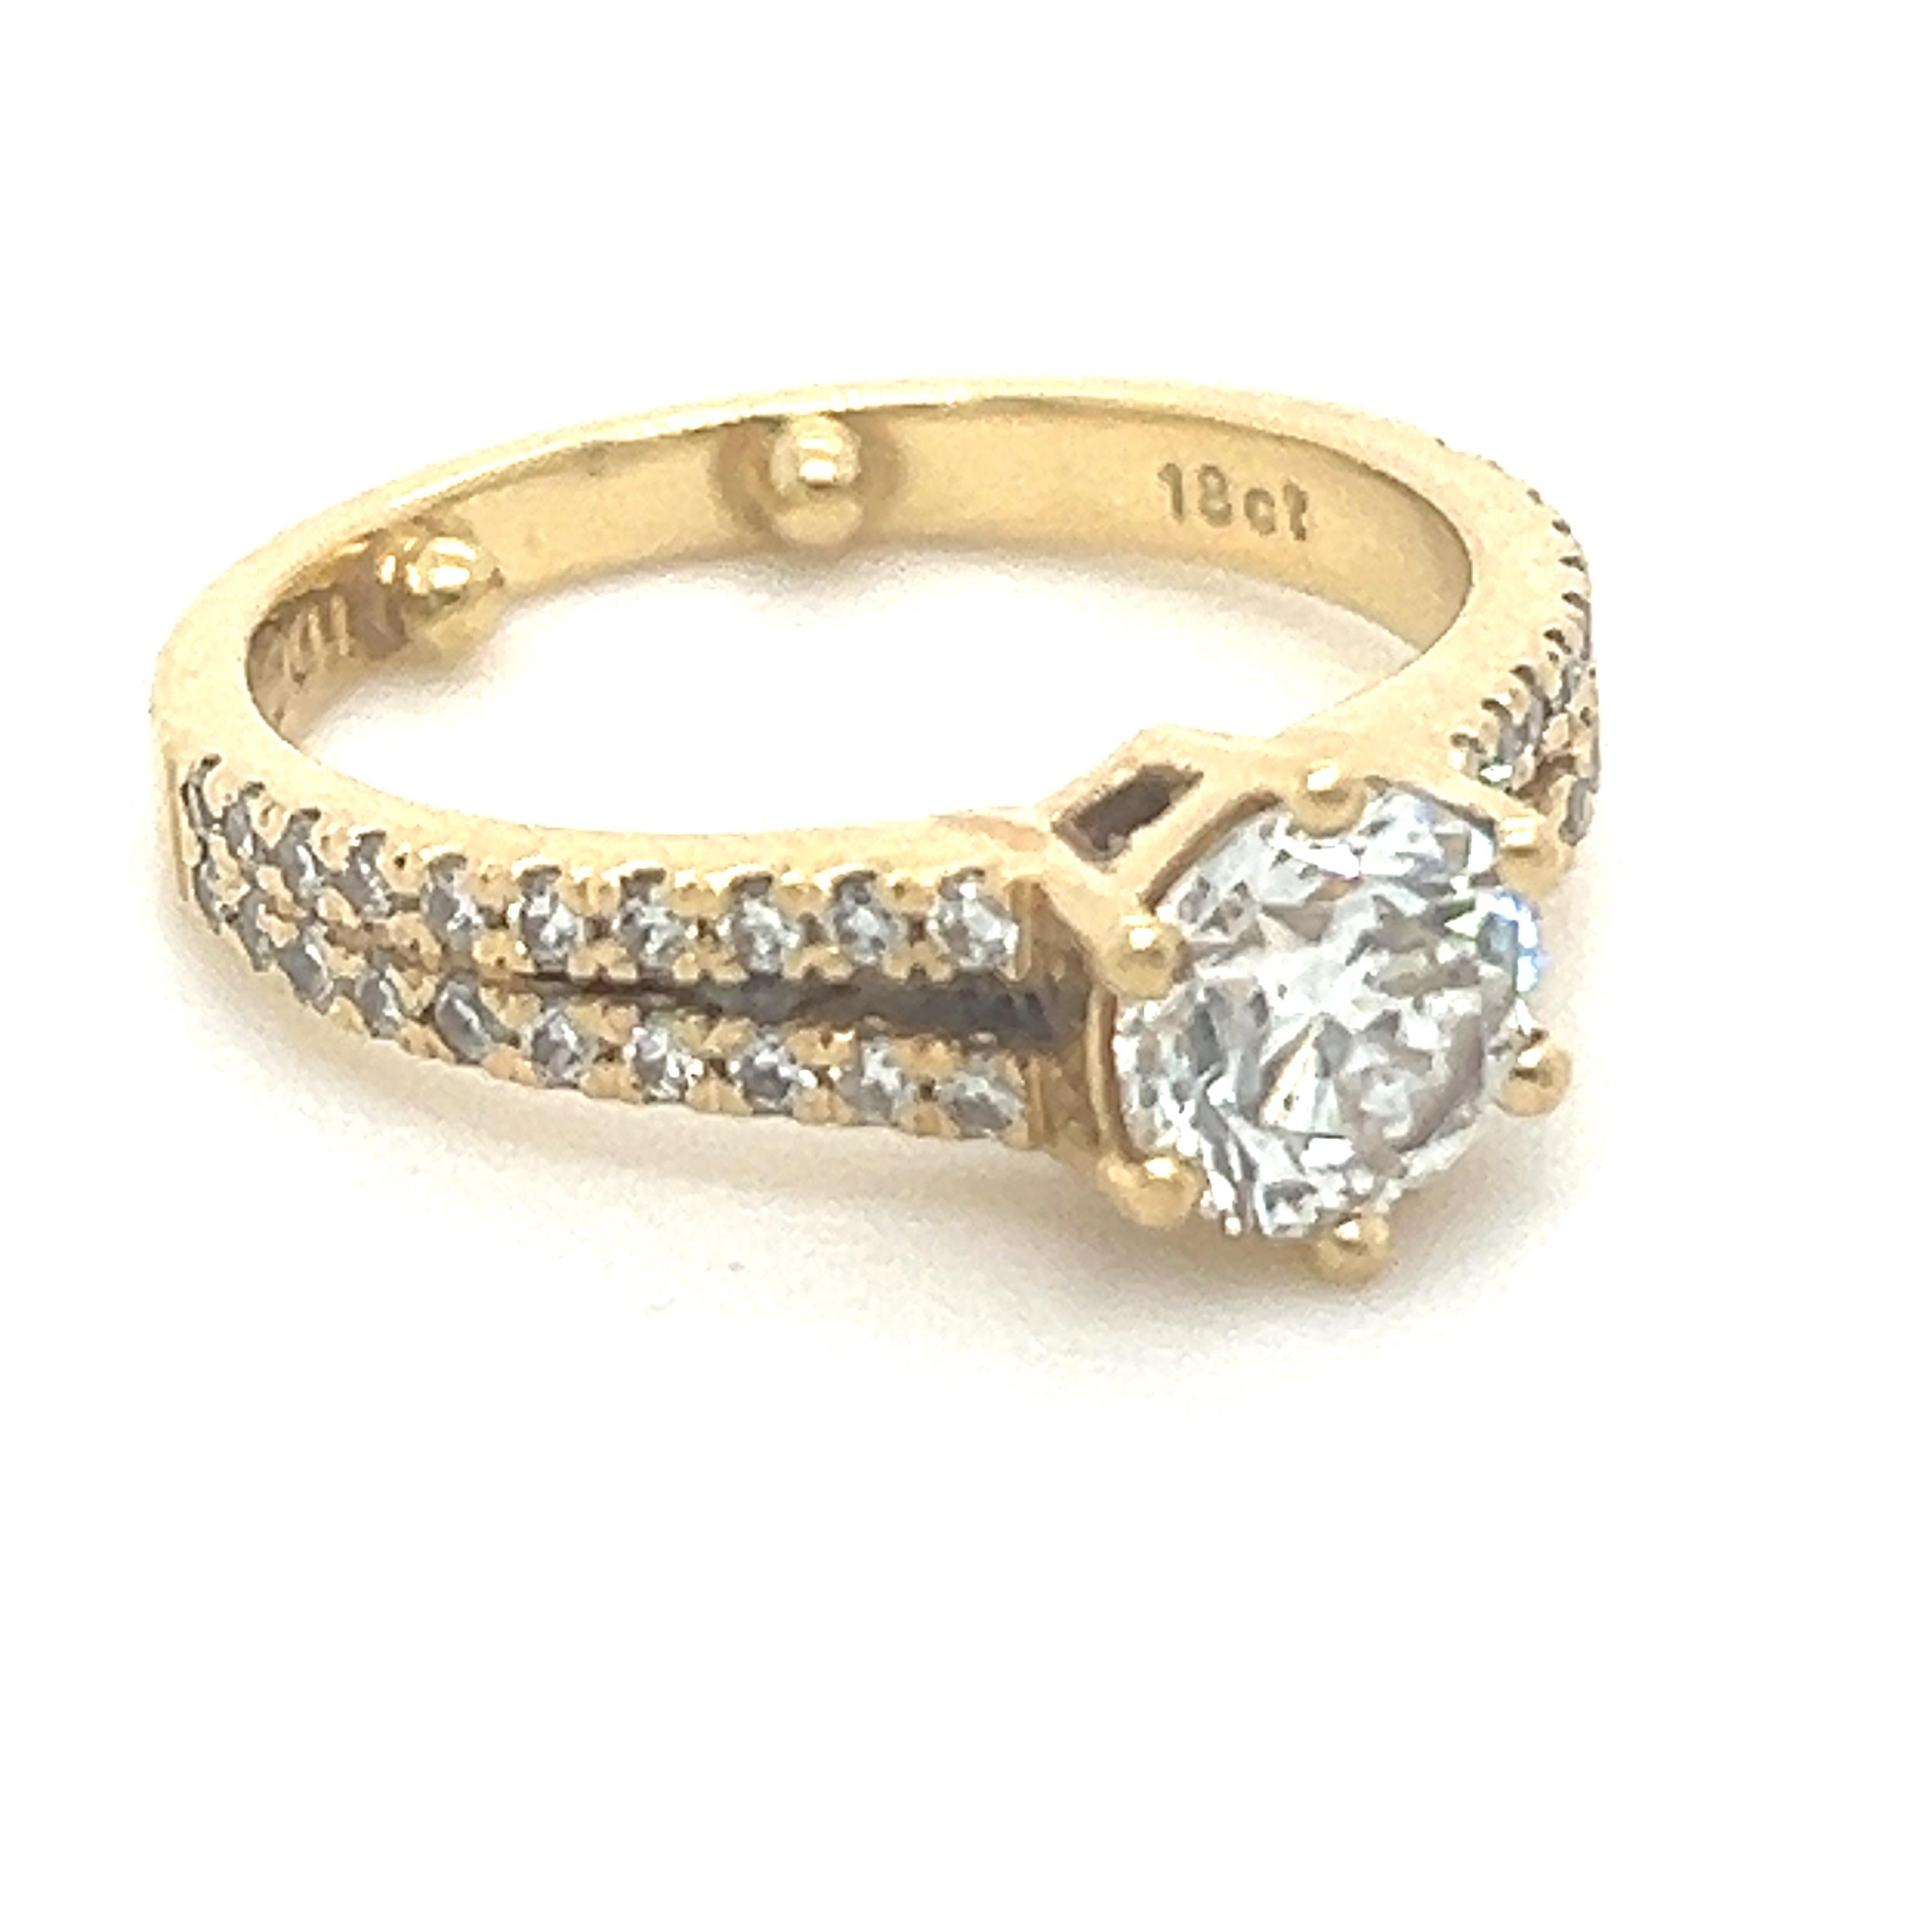 A GIA 18ct Yellow Gold Engagement Ring as sample set with:

Centre Diamond = 1.00ct. Colour: H, Clarity: SI1. Round Brilliant cut diamond

GIA Report 6305141266 and 40 x +/-0.40ct (total weight)

Colour: G/H Clarity: VS/SI. Round Brilliant cut